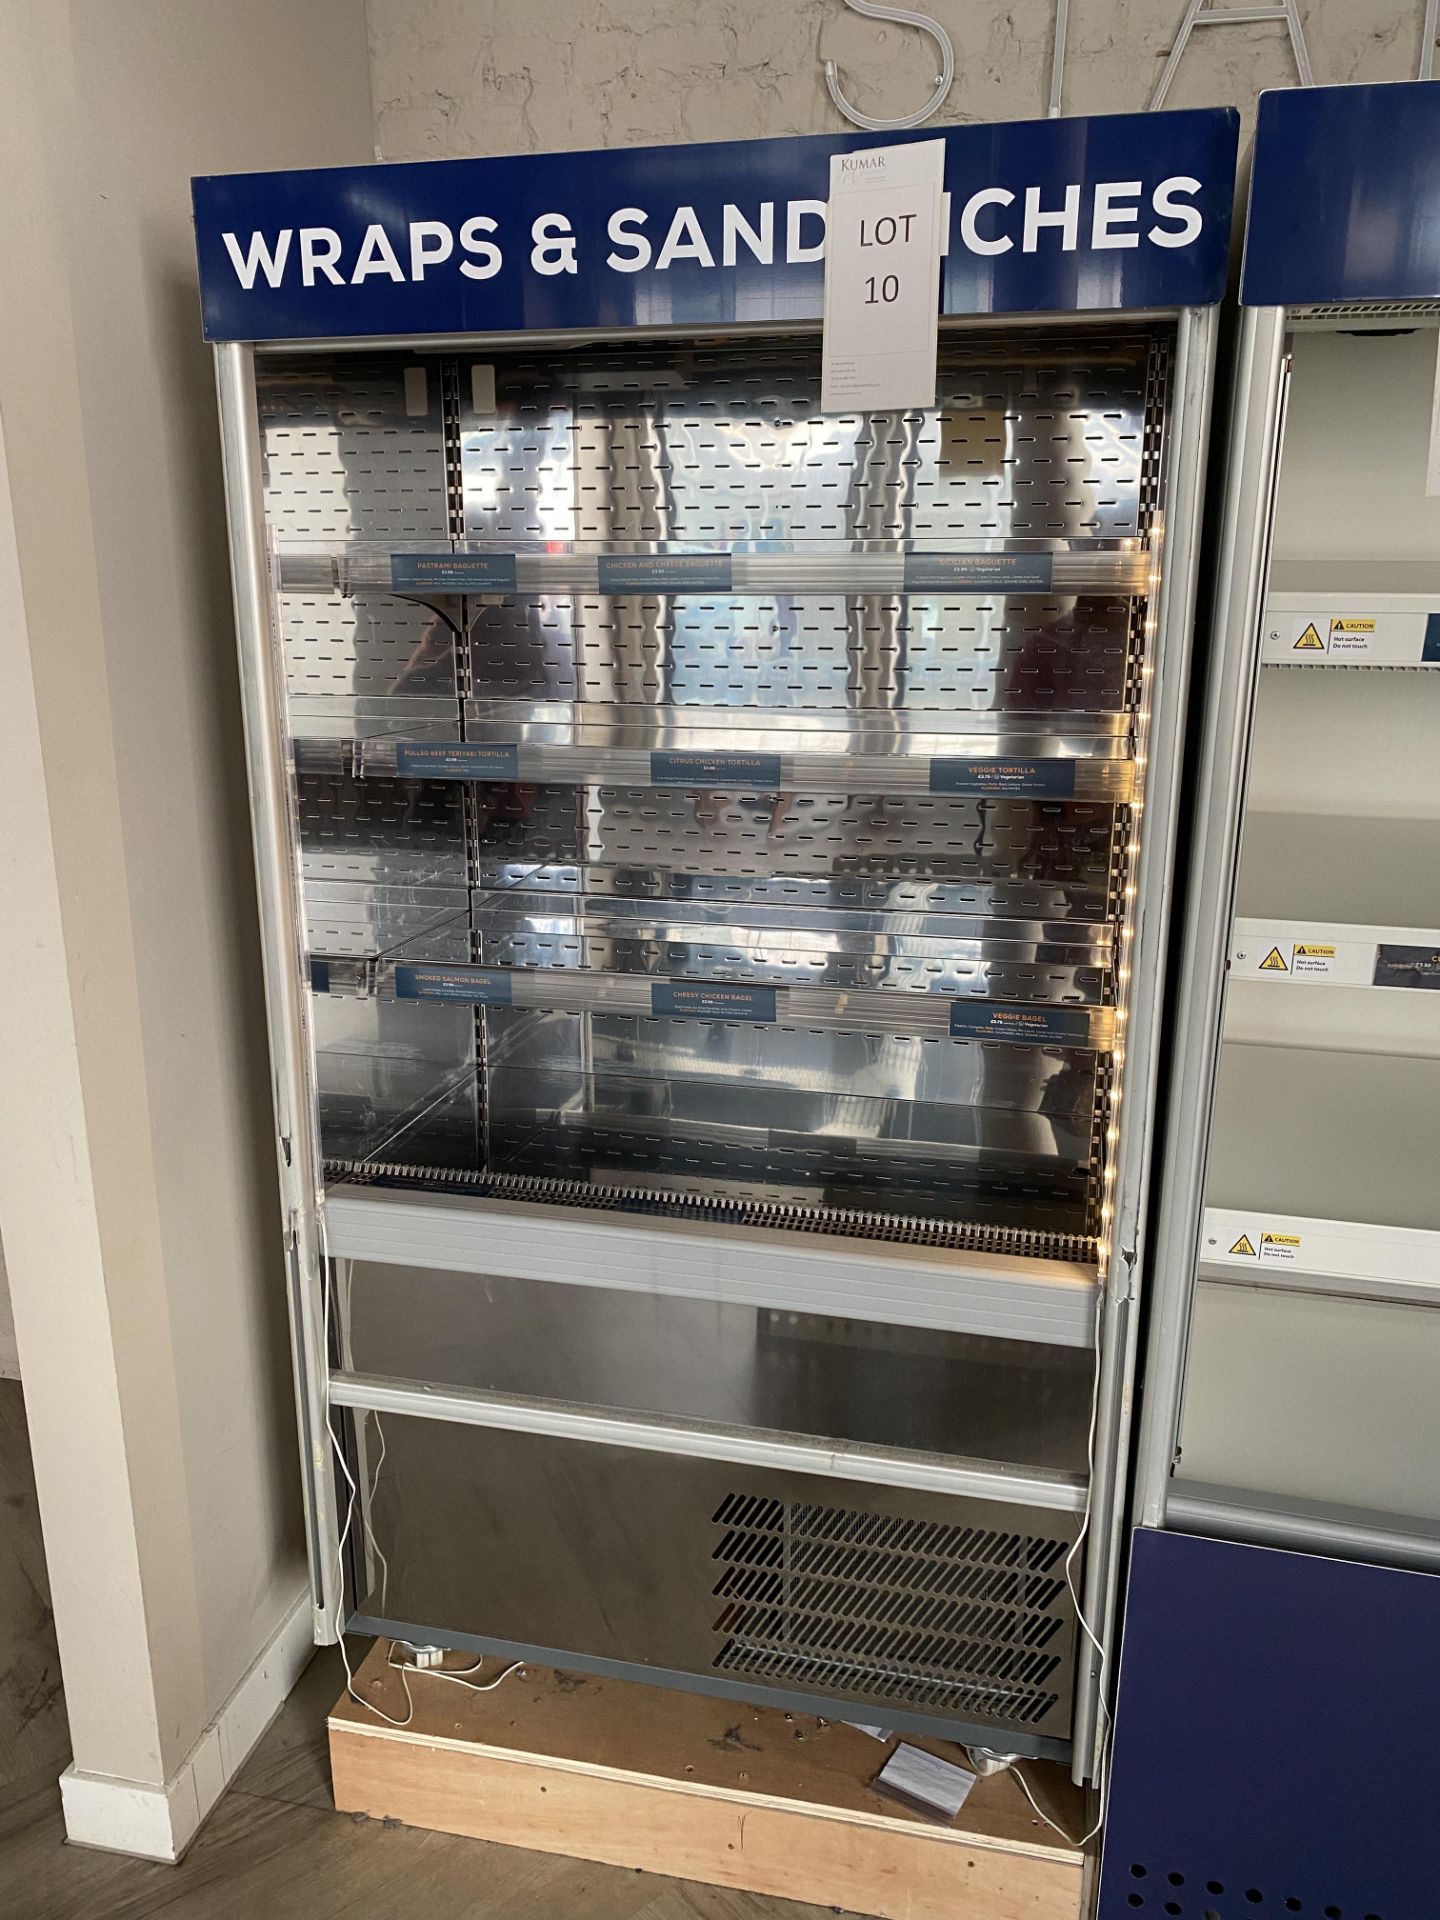 Williams Slimline Gem Multideck Food Merchandising Chiller Unit with Night Blind and IWC720 - Image 2 of 8